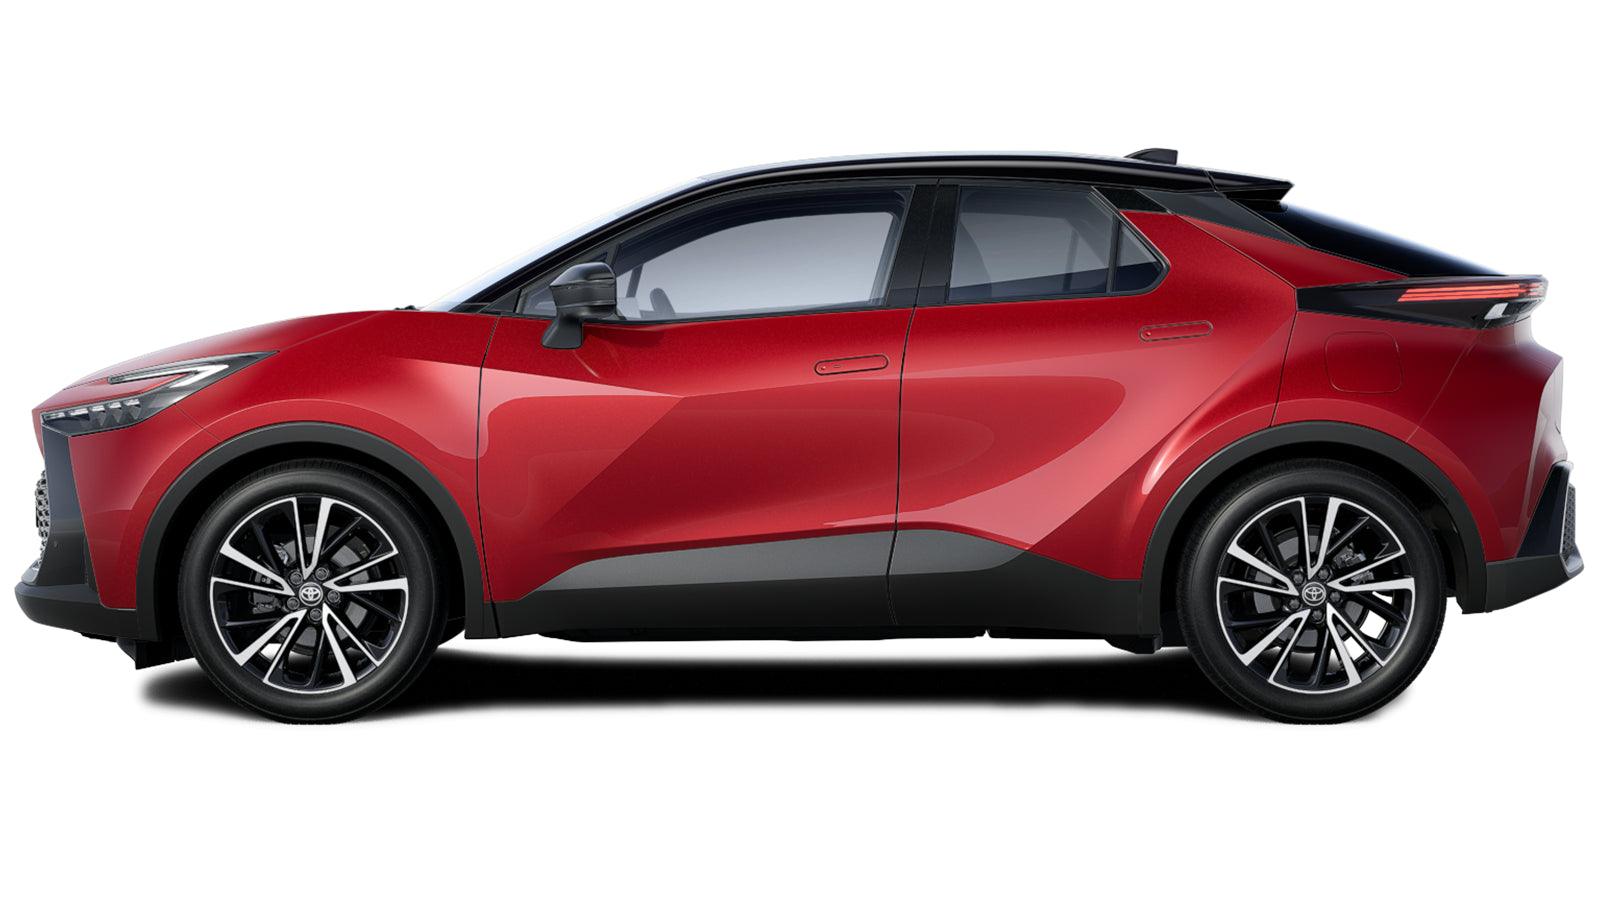 Toyota C-HR 2.0 PHEV FWD Exclusive Black / Emotional Red - Toyota Promo